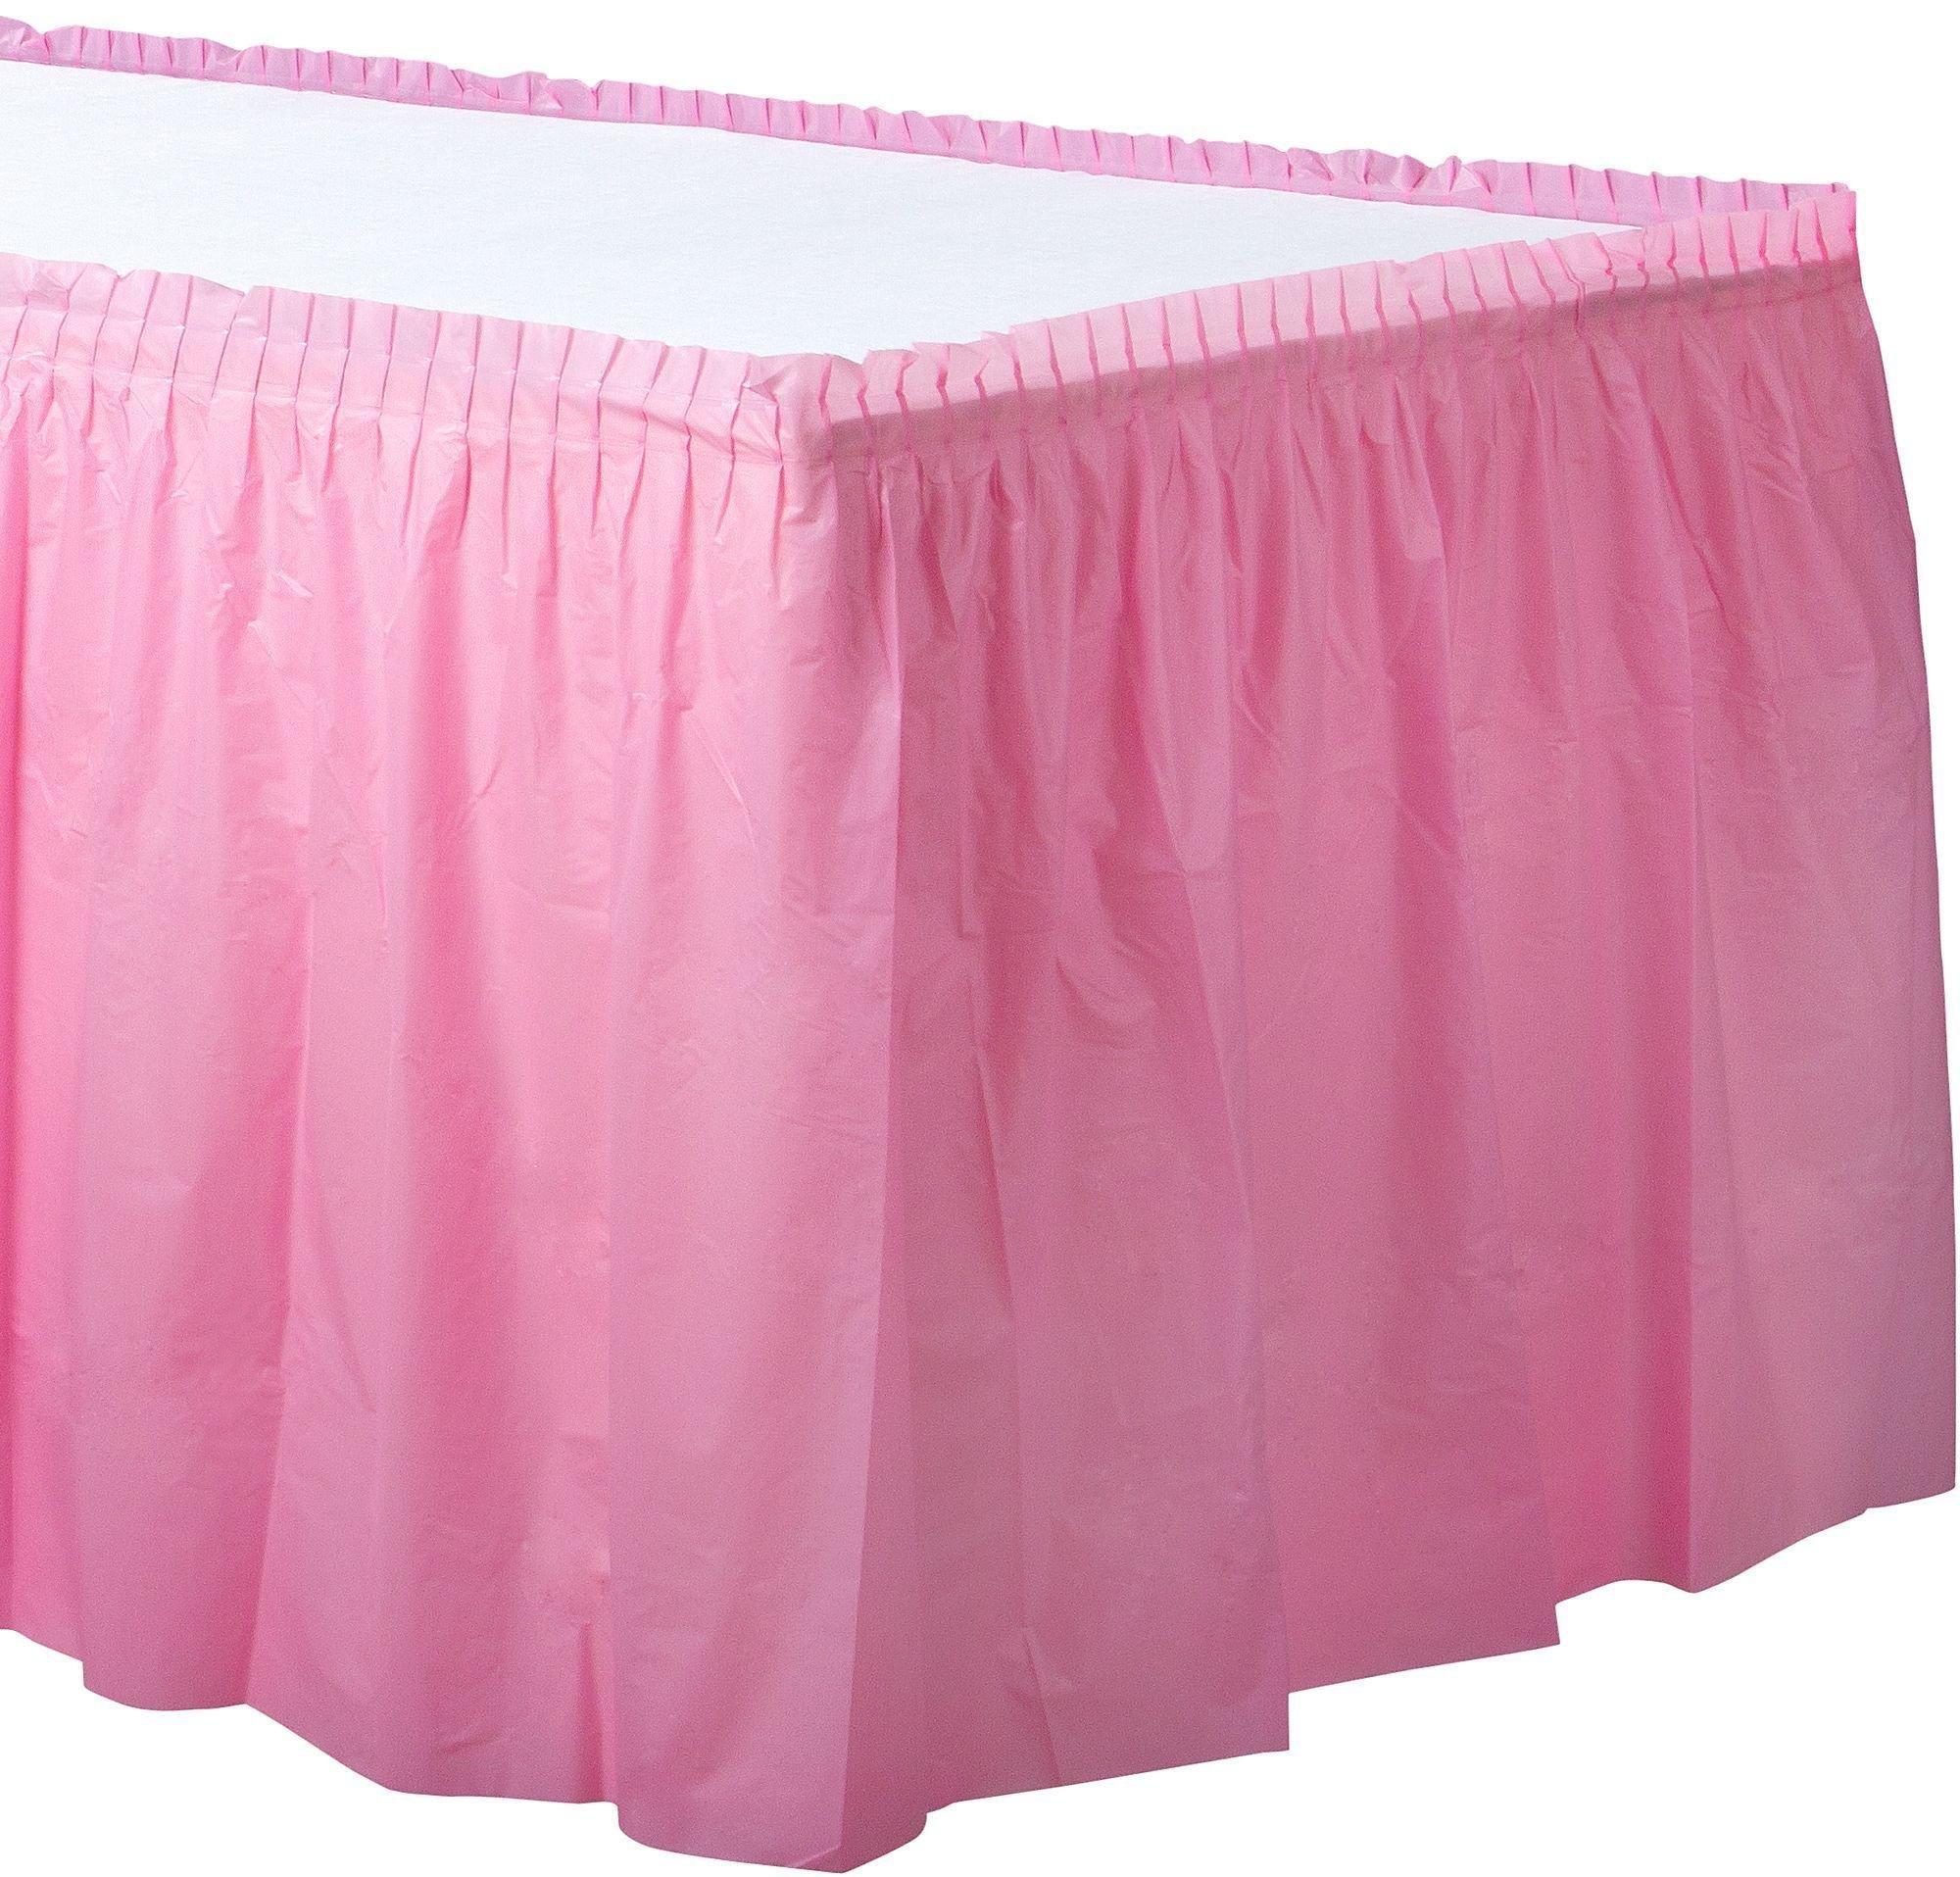 Pink Plastic Table Skirt, 21ft x 29in